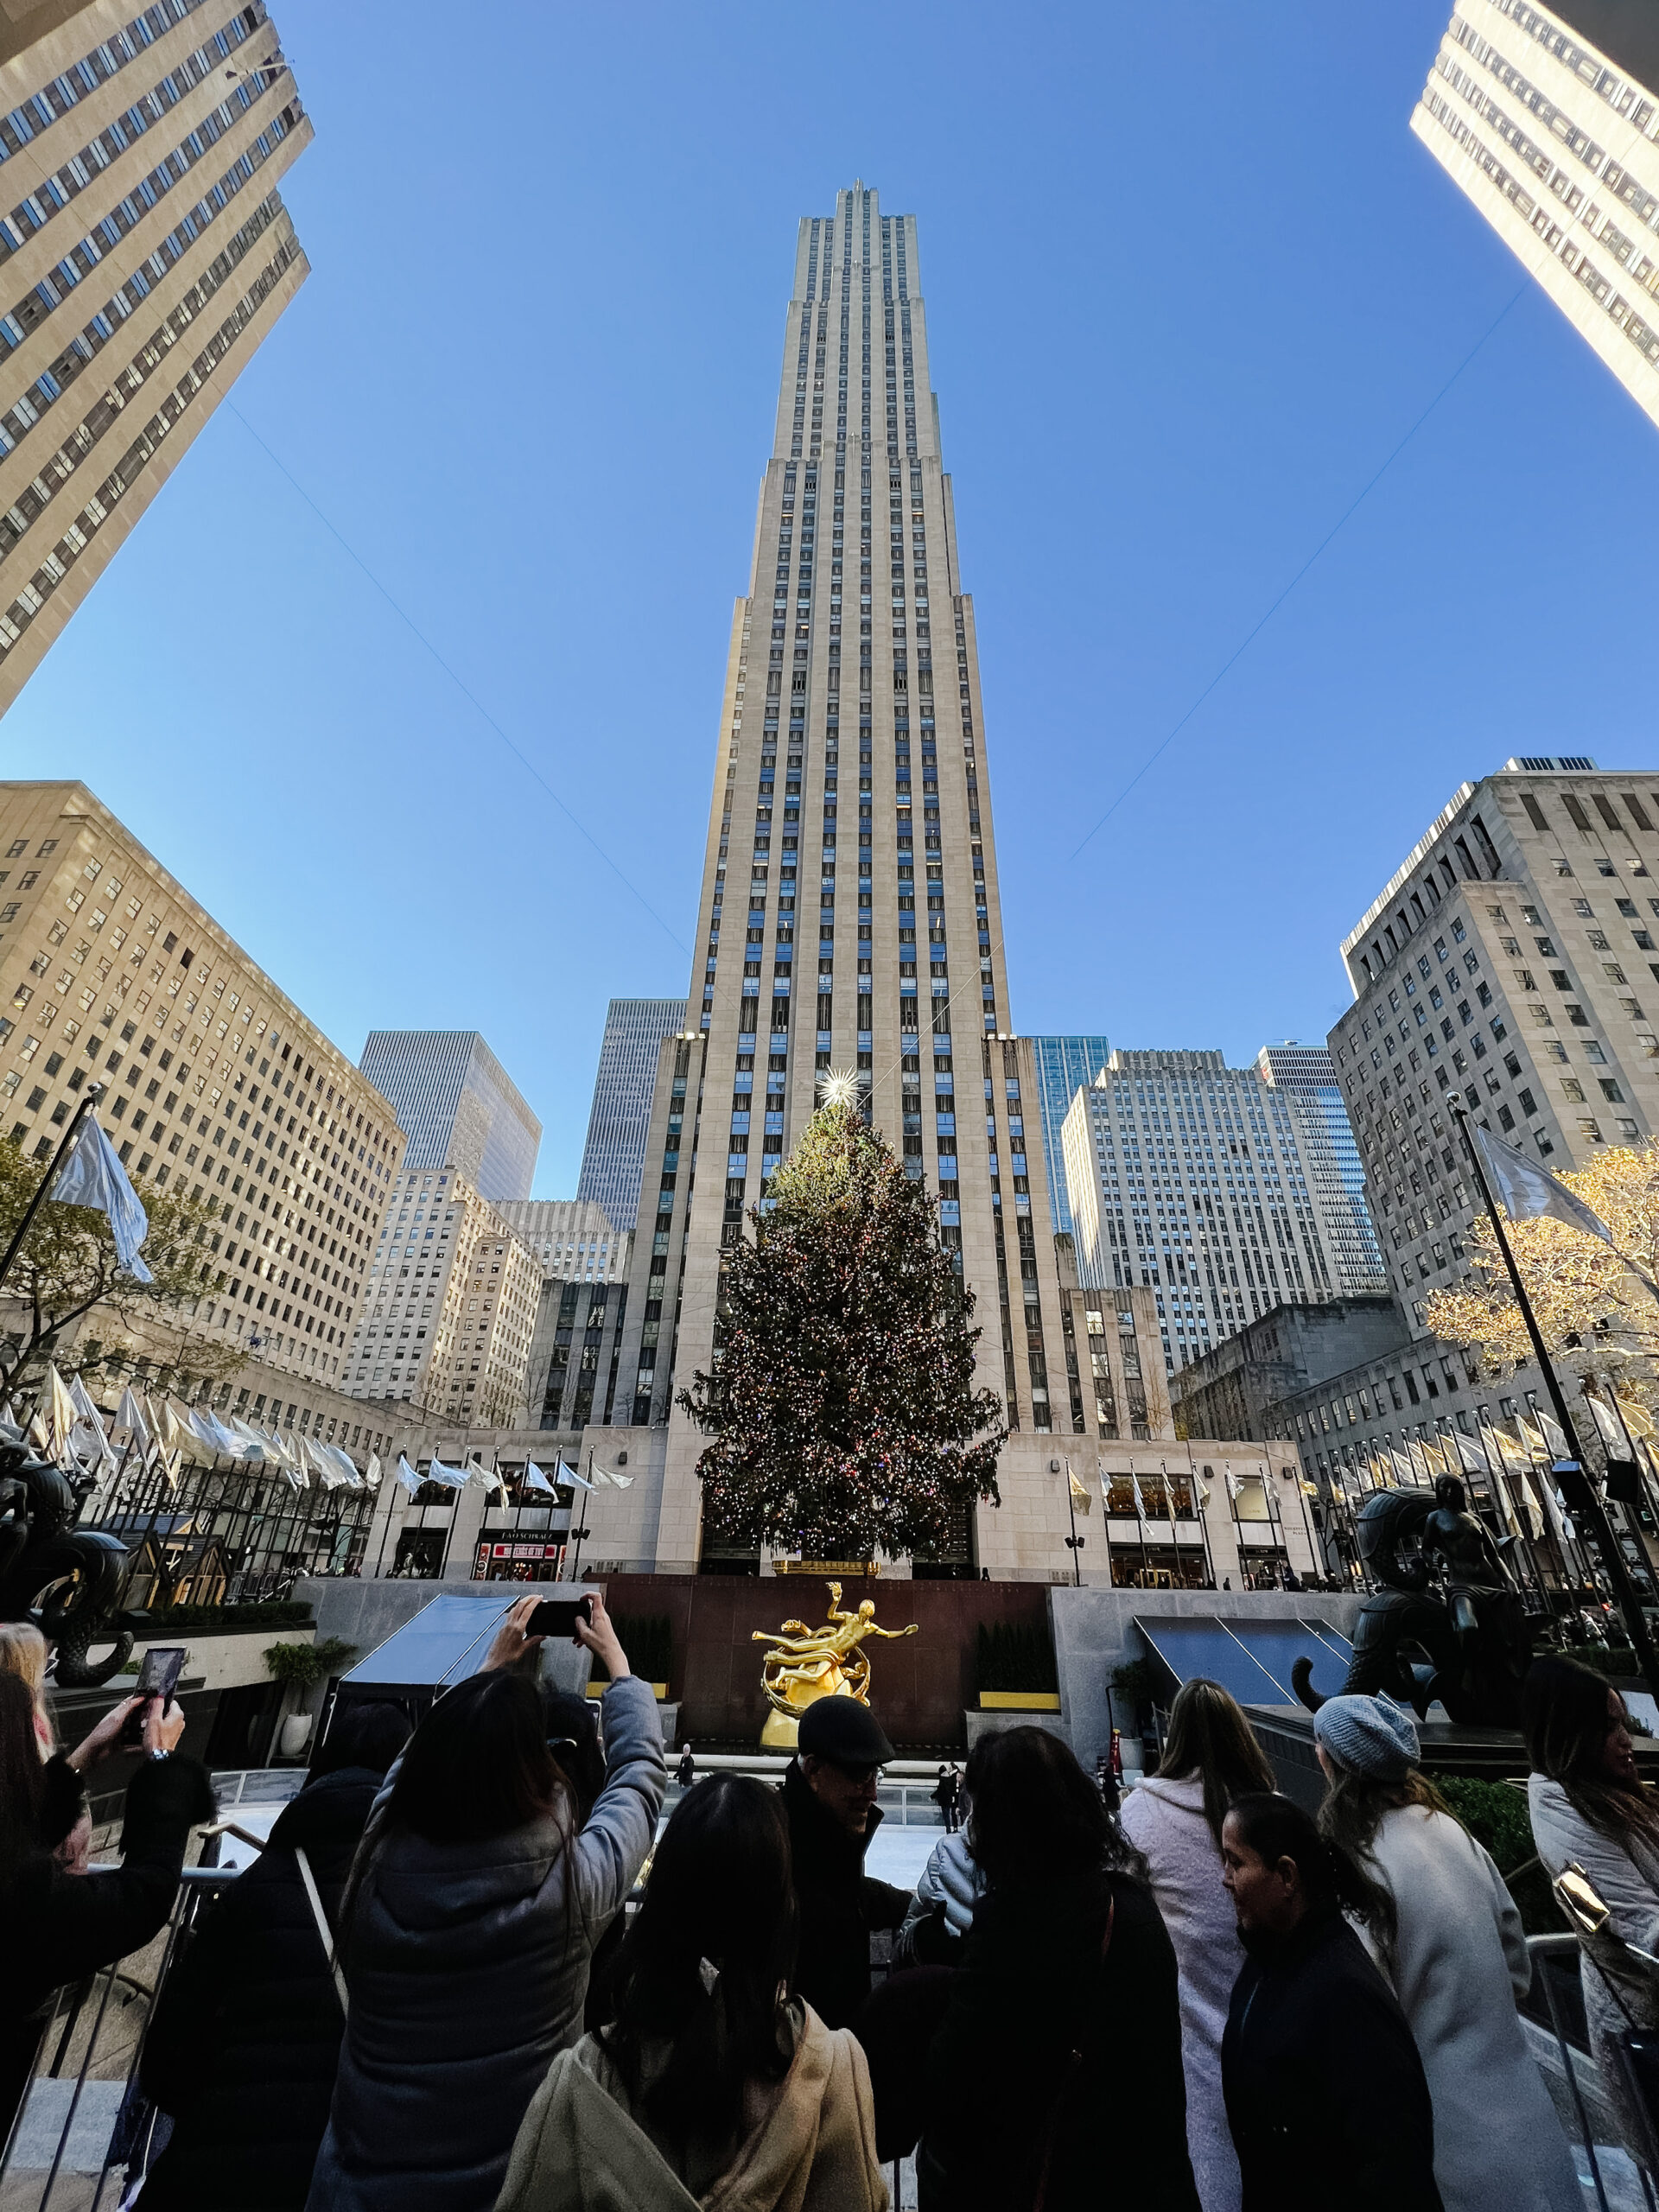 View of the Rockefeller Plaza the Christmas tree.